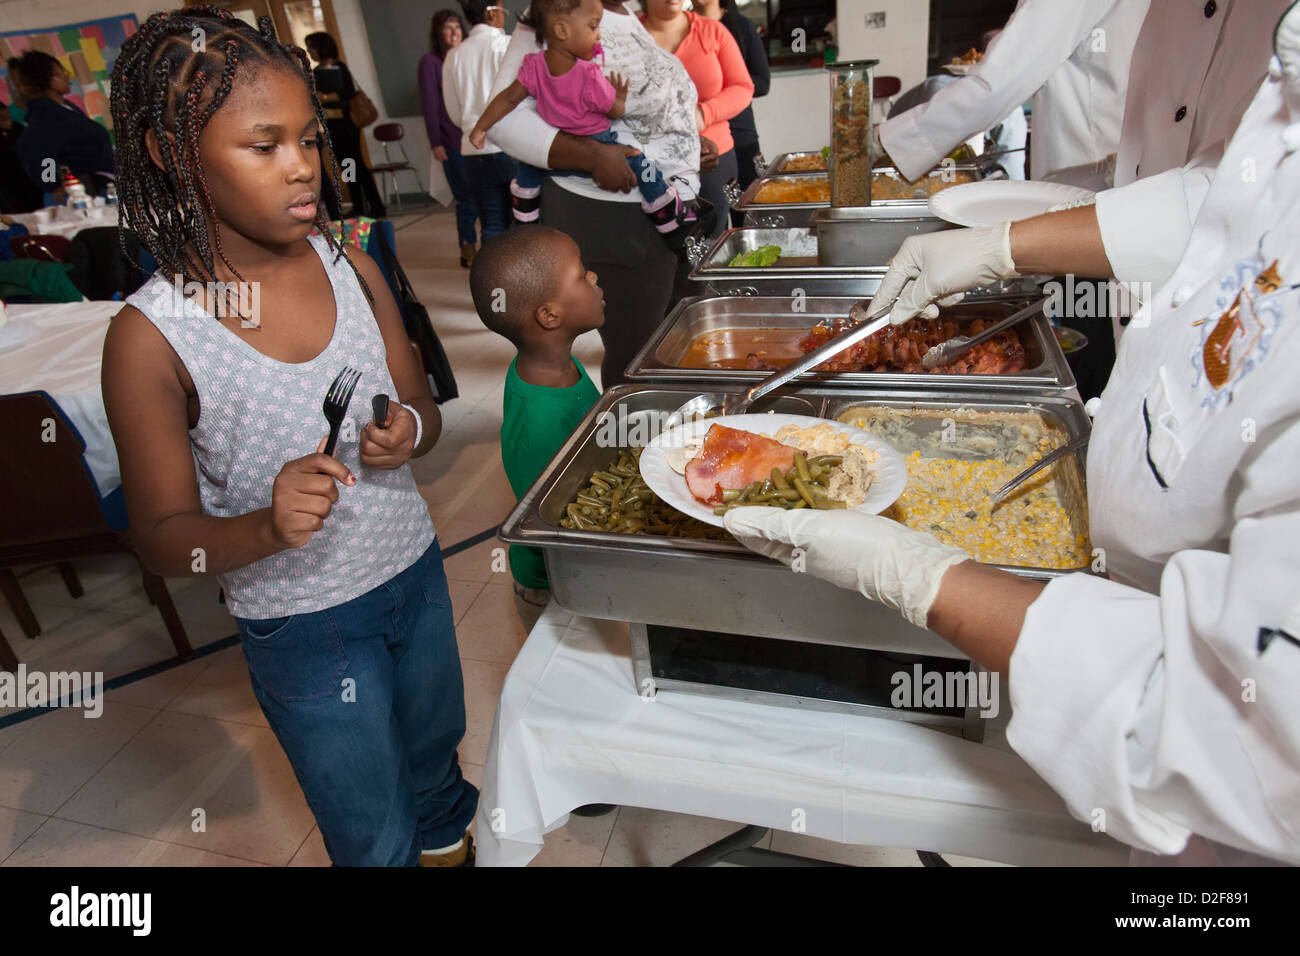 Detroit, Michigan - A meal is served to residents of a Salvation Army shelter for homeless women and children. Stock Photo